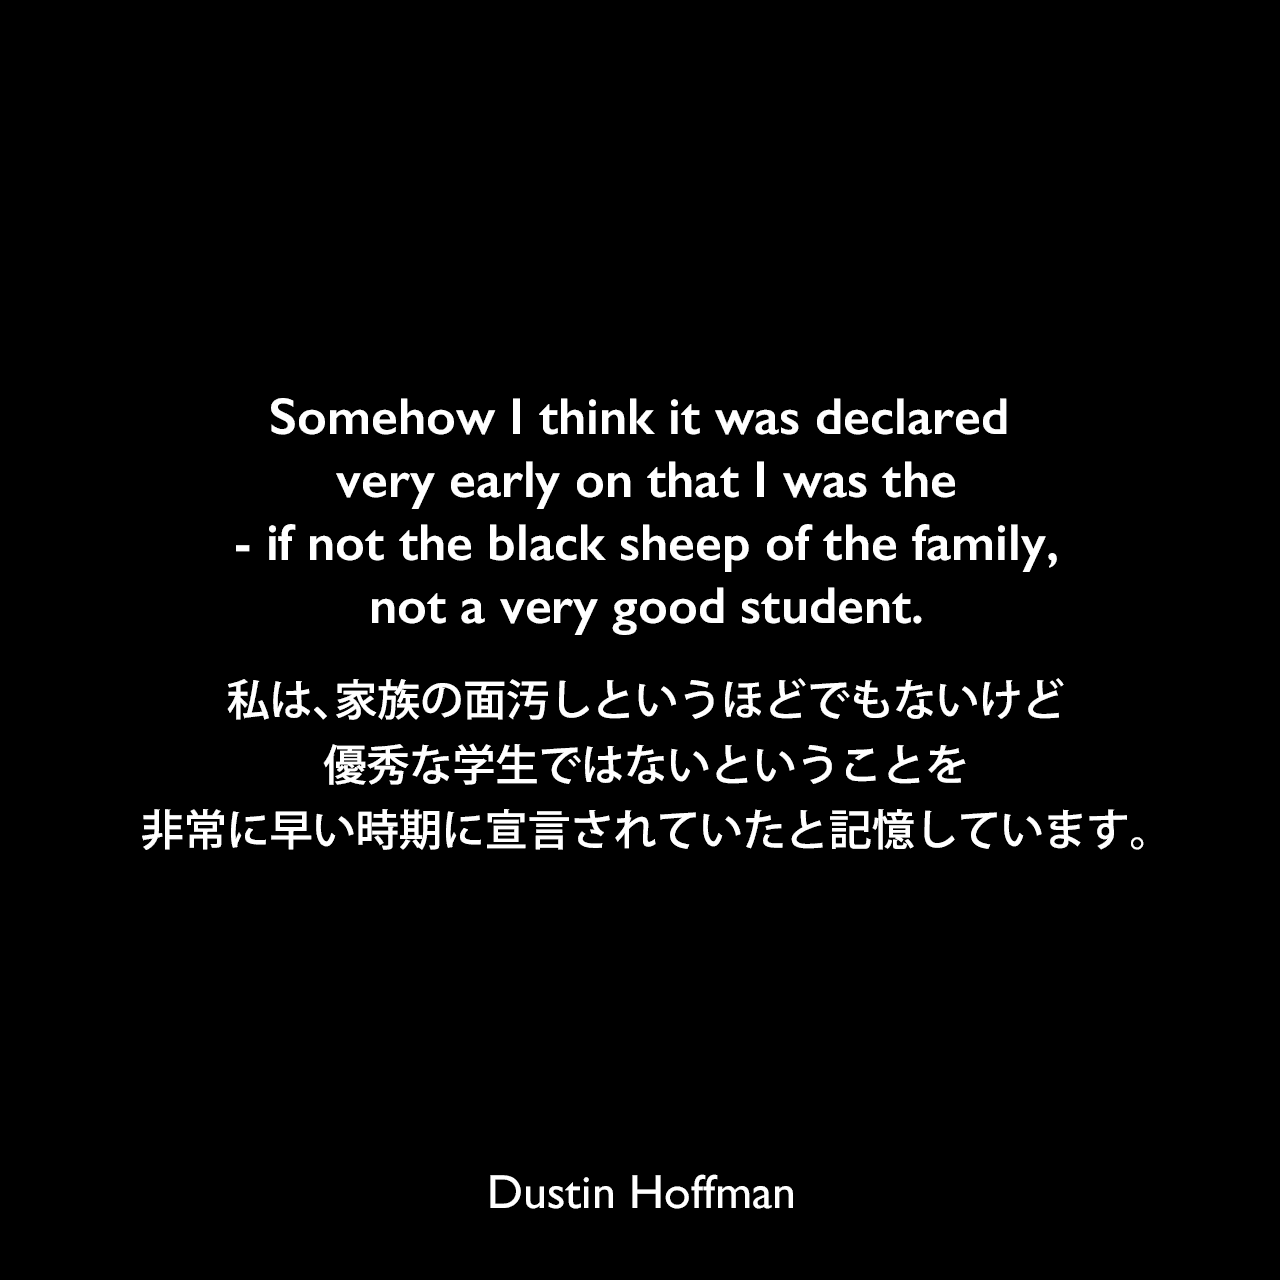 Somehow I think it was declared very early on that I was the - if not the black sheep of the family, not a very good student.私は、家族の面汚しというほどでもないけど、優秀な学生ではないということを、非常に早い時期に宣言されていたと記憶しています。Dustin Hoffman